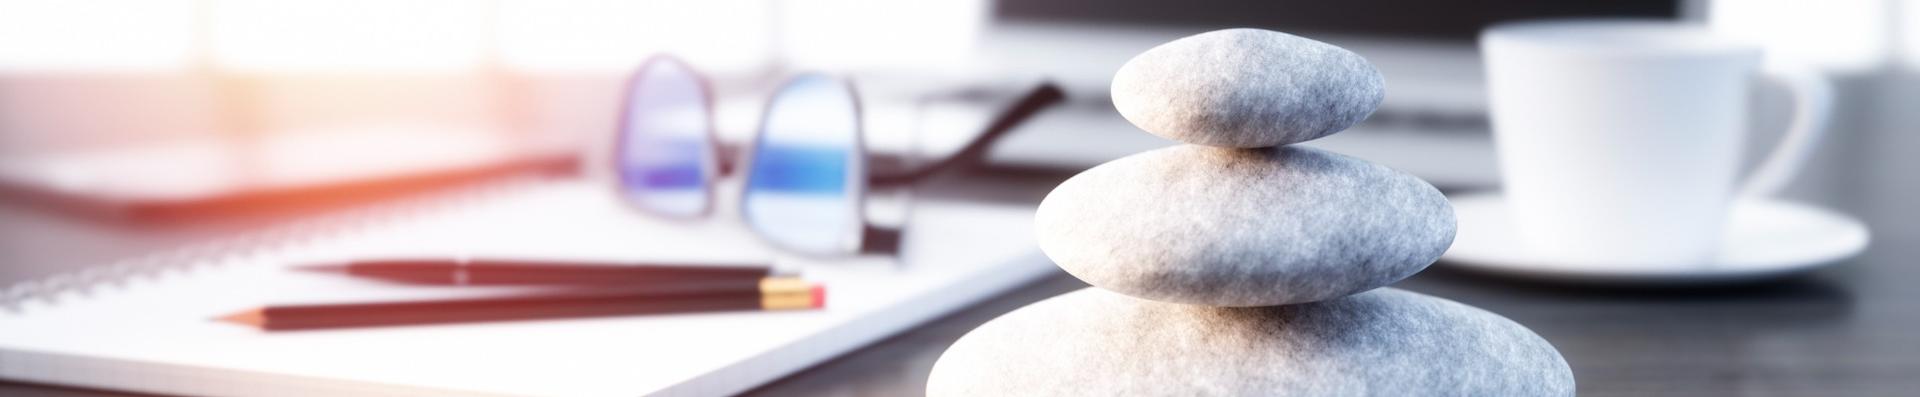 stack of pebbles on desk